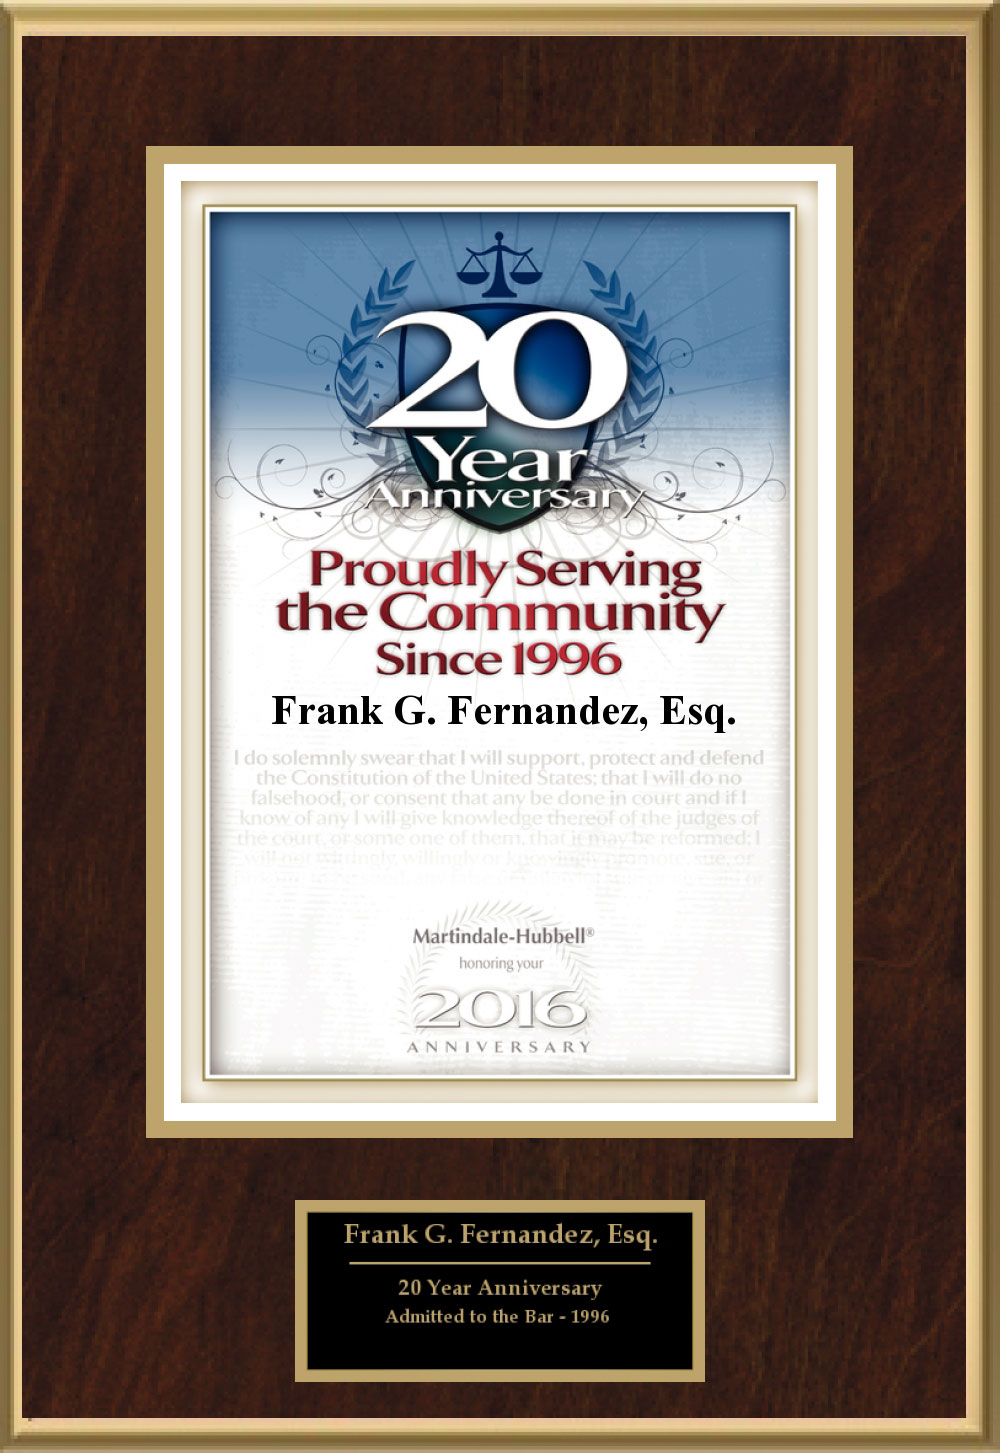 2015 award for 20 years serving the Tampa community